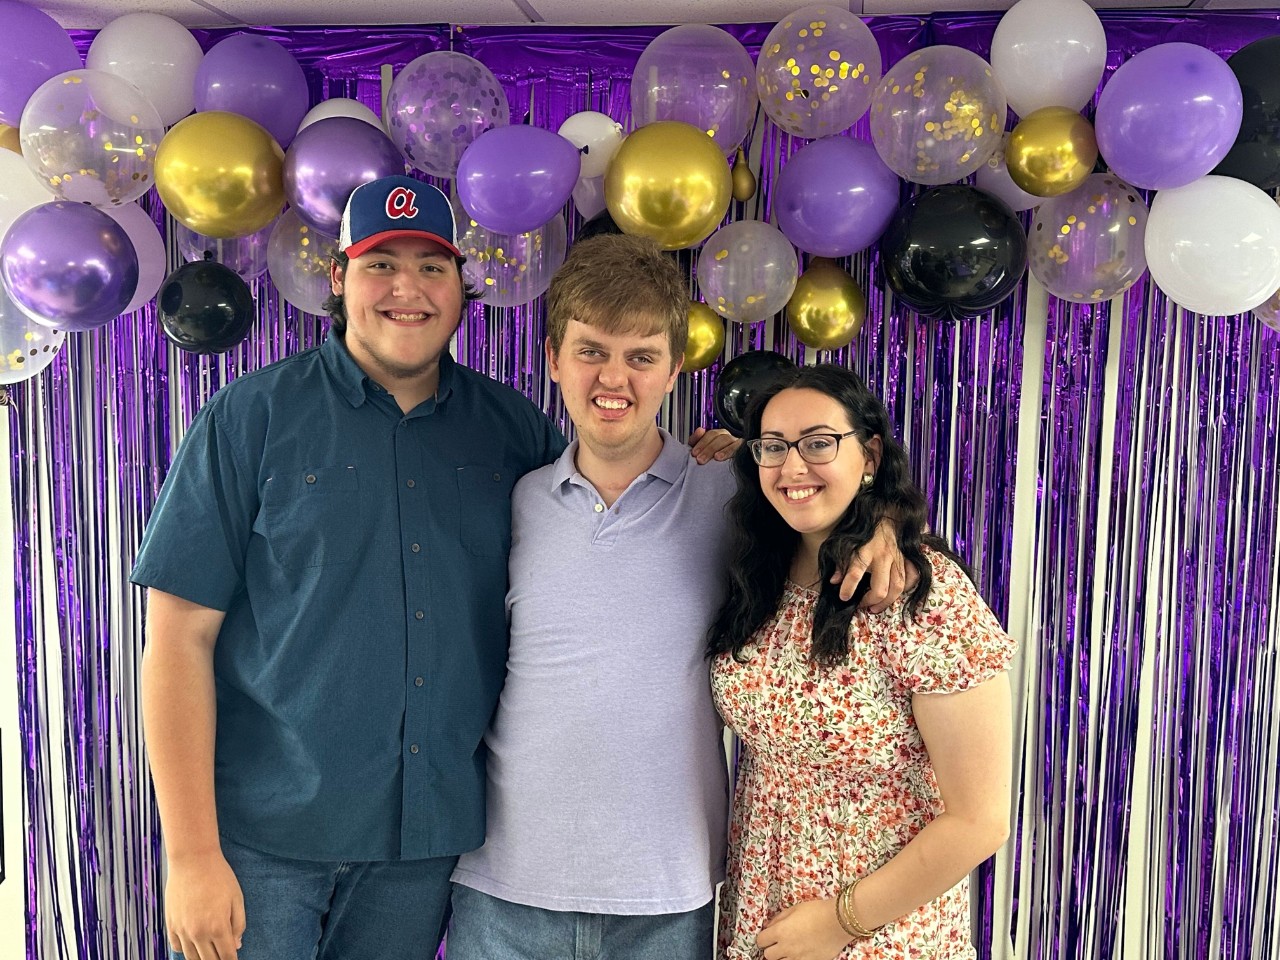 three white, young adults pose with their arms around each other in front of a purple drape background with purple, black, and gold balloons 